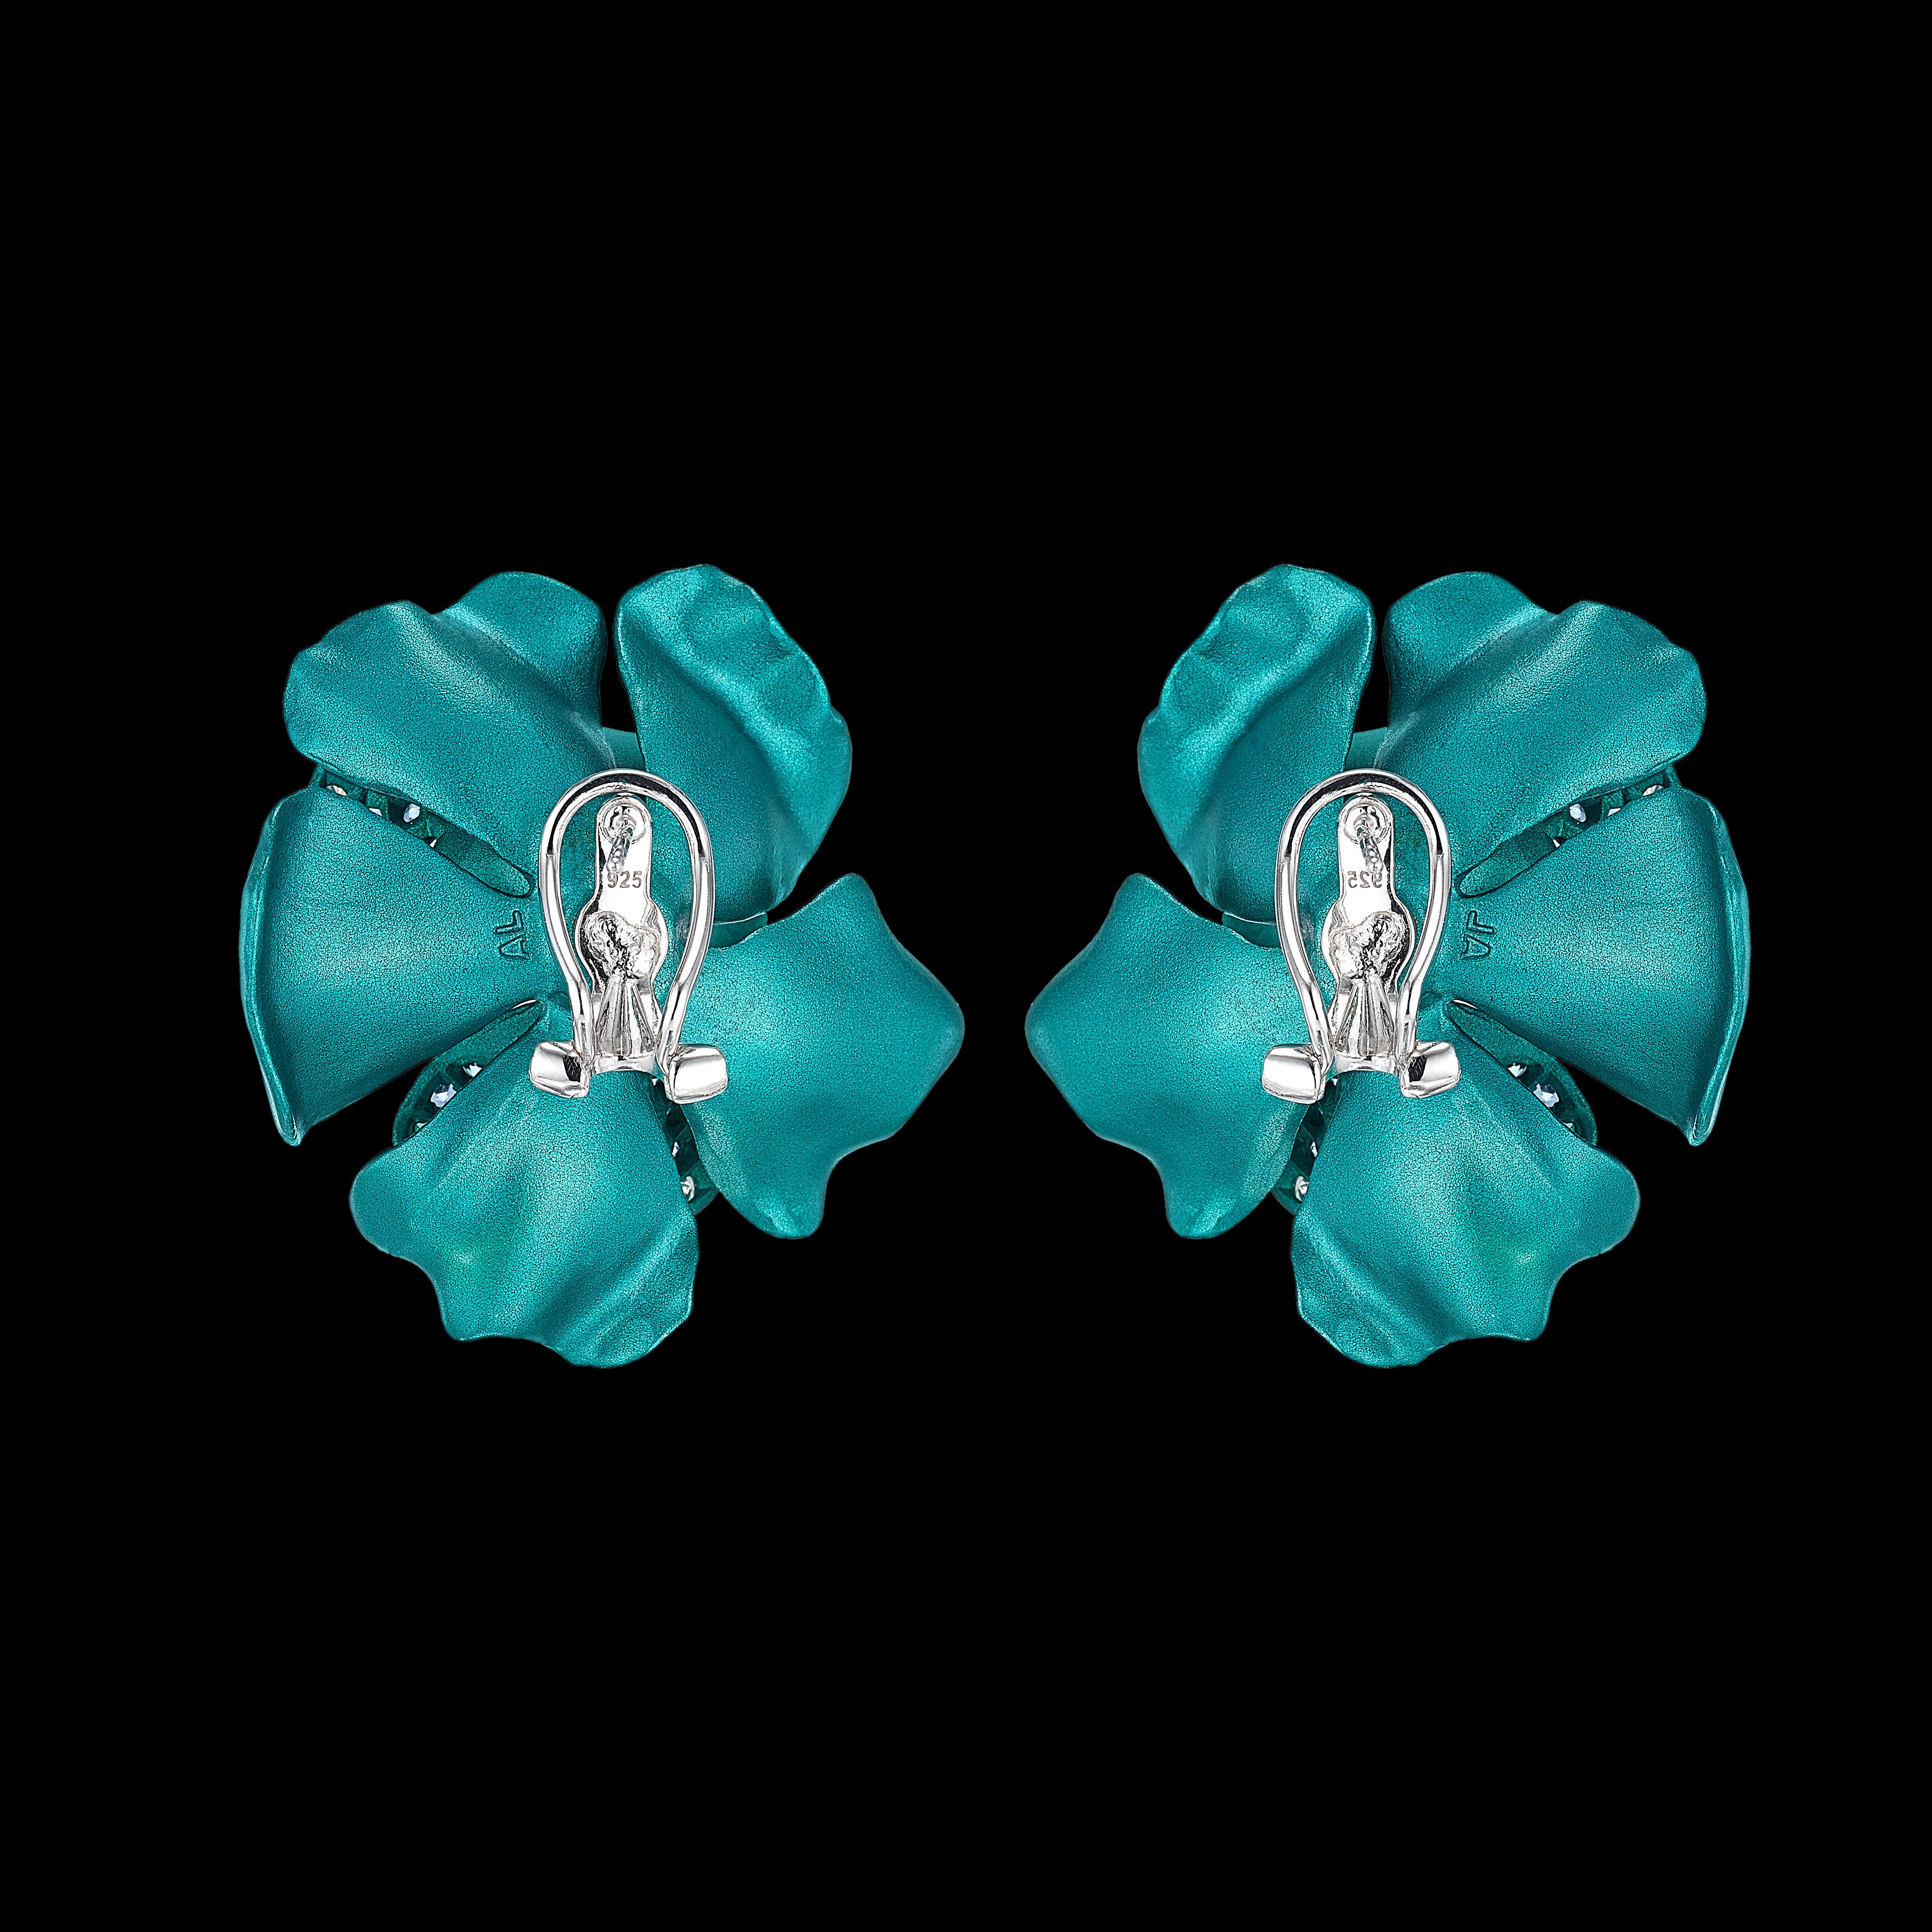 Paraiba Bloom Earrings, Earrings, Anabela Chan Joaillerie - Fine jewelry with laboratory grown and created gemstones hand-crafted in the United Kingdom. Anabela Chan Joaillerie is the first fine jewellery brand in the world to champion laboratory-grown and created gemstones with high jewellery design, artisanal craftsmanship and a focus on ethical and sustainable innovations.